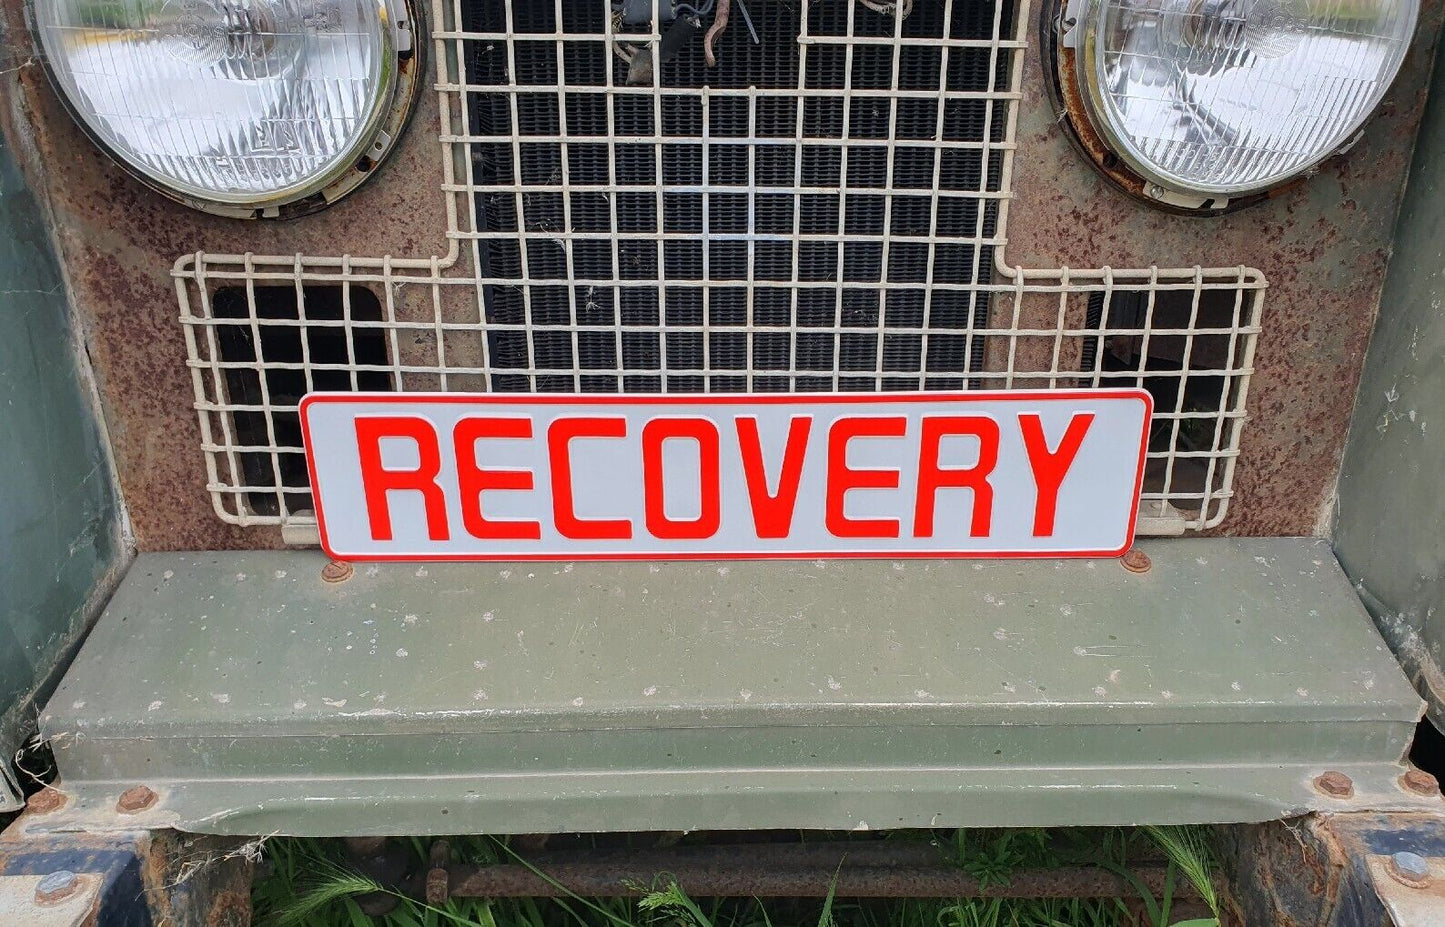 Breakdown Recovery Pressed Towing Plate